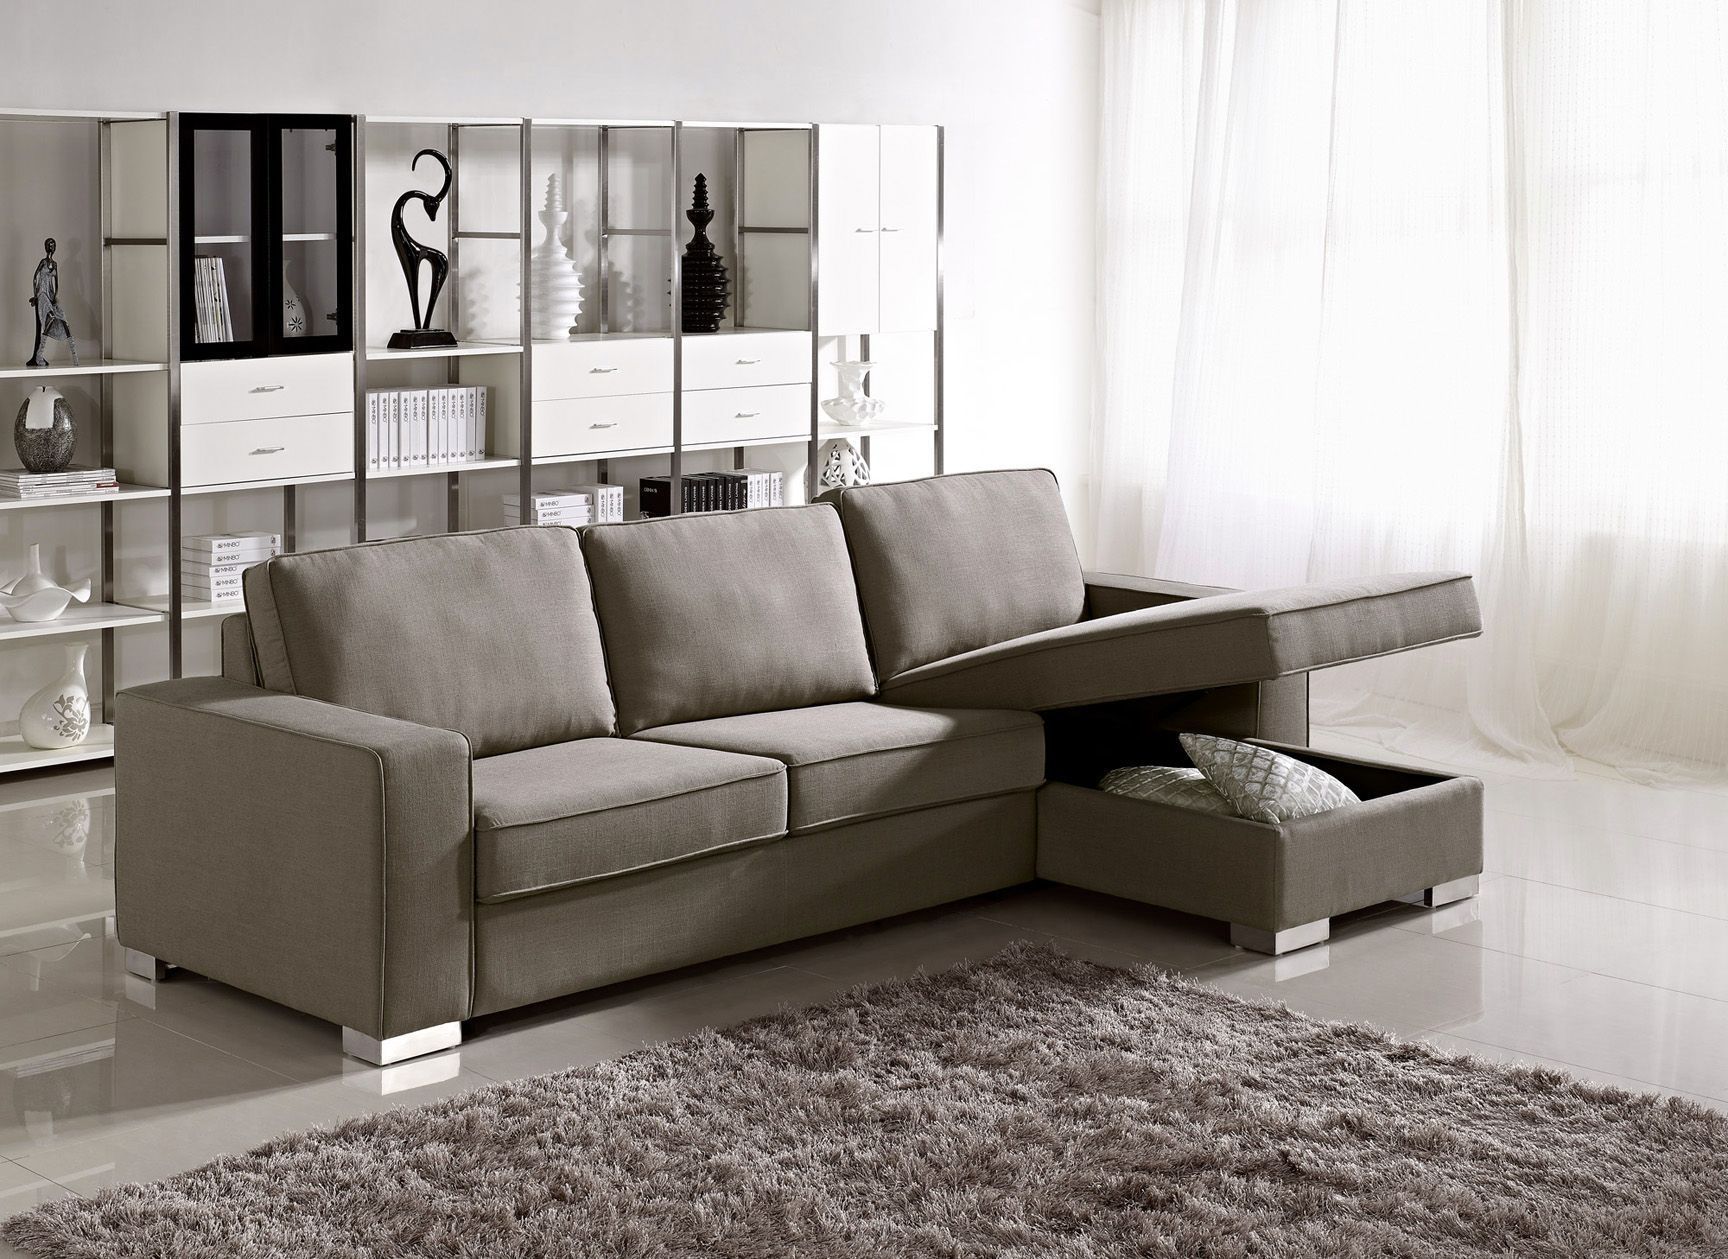 Best Apartment Sectional Sofa Images Daclahepco Daclahepco Throughout Apartment Sectional Sofa With Chaise (View 1 of 15)